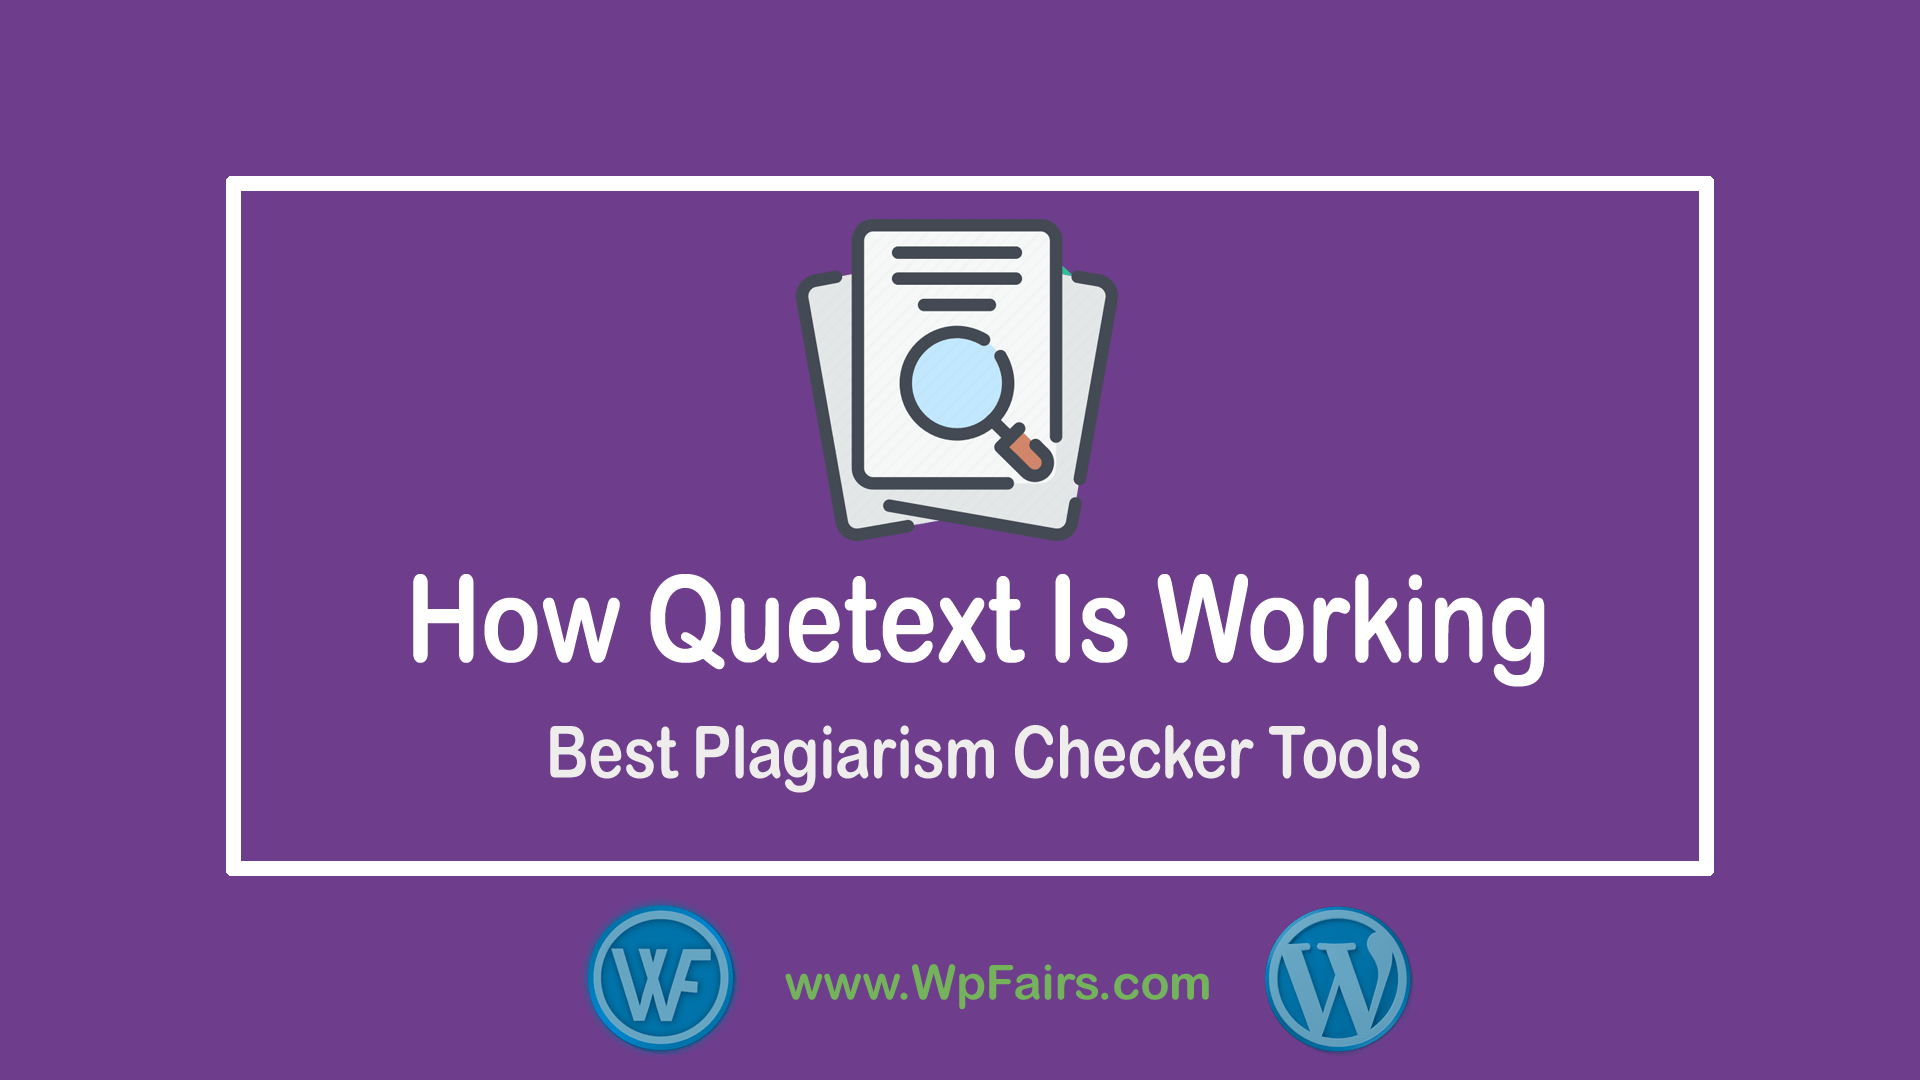 How Quetext Plagiarism Checker Tools Is Working wpFairs